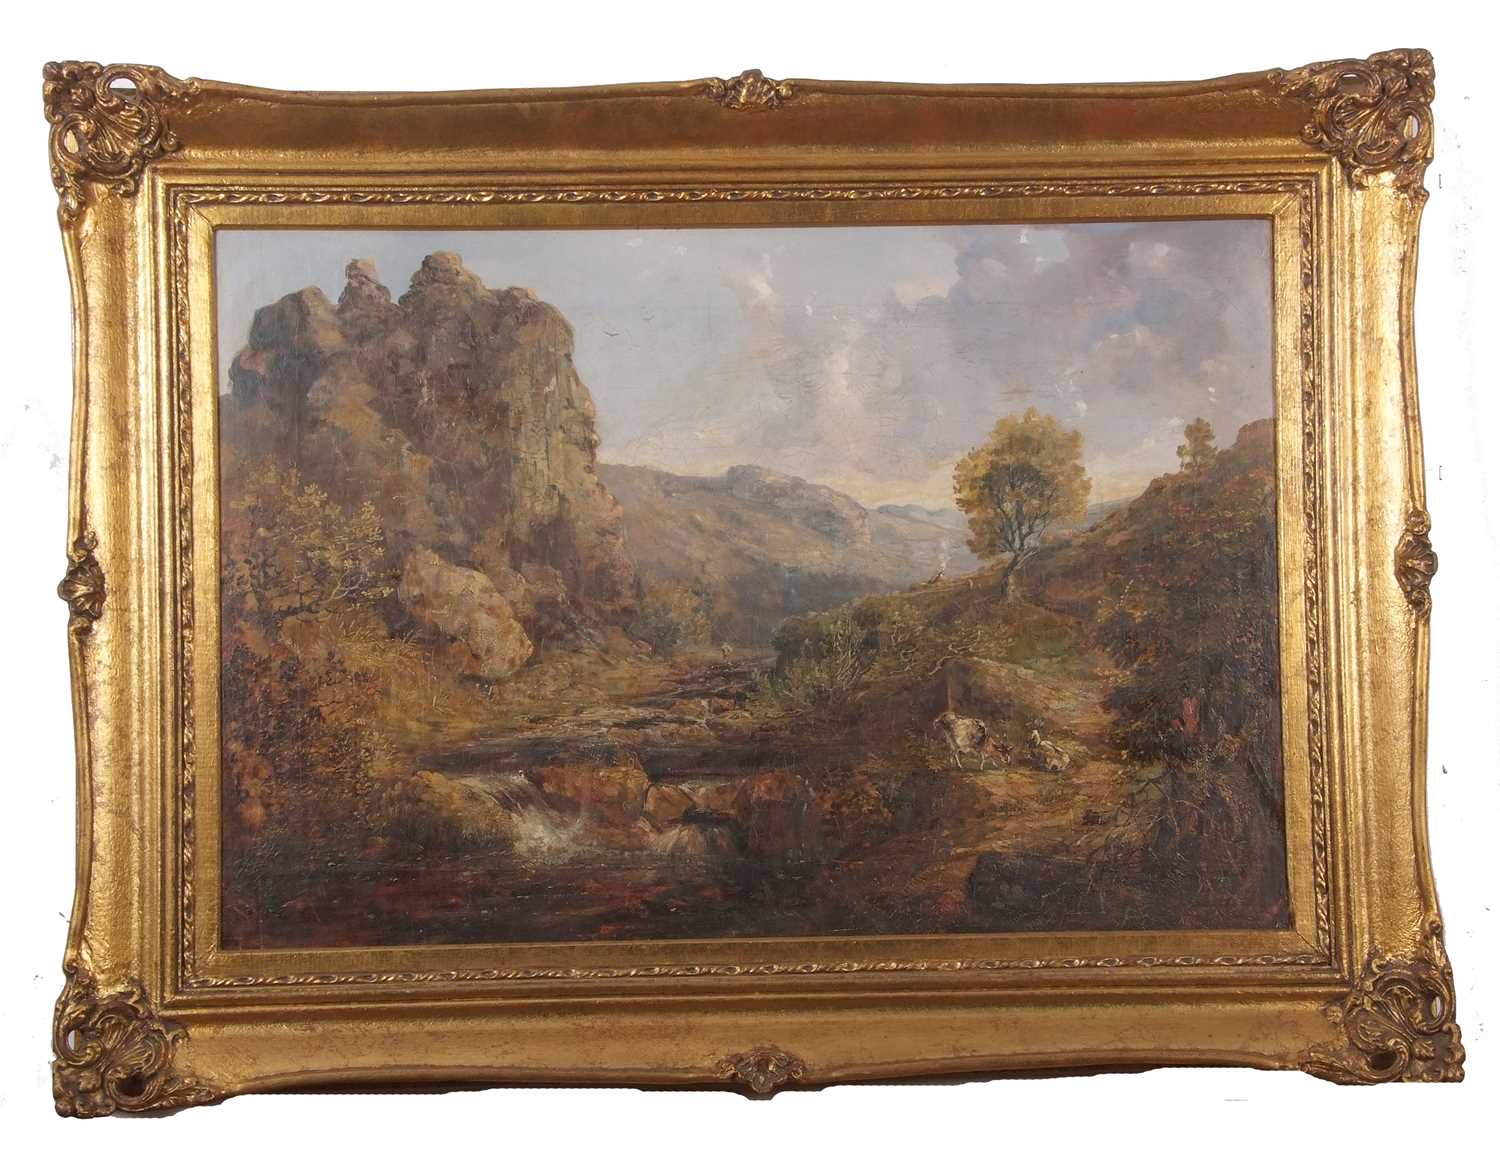 Continental School, circa 19th century, A mountainous landscape scene with figures by a river and - Image 2 of 5